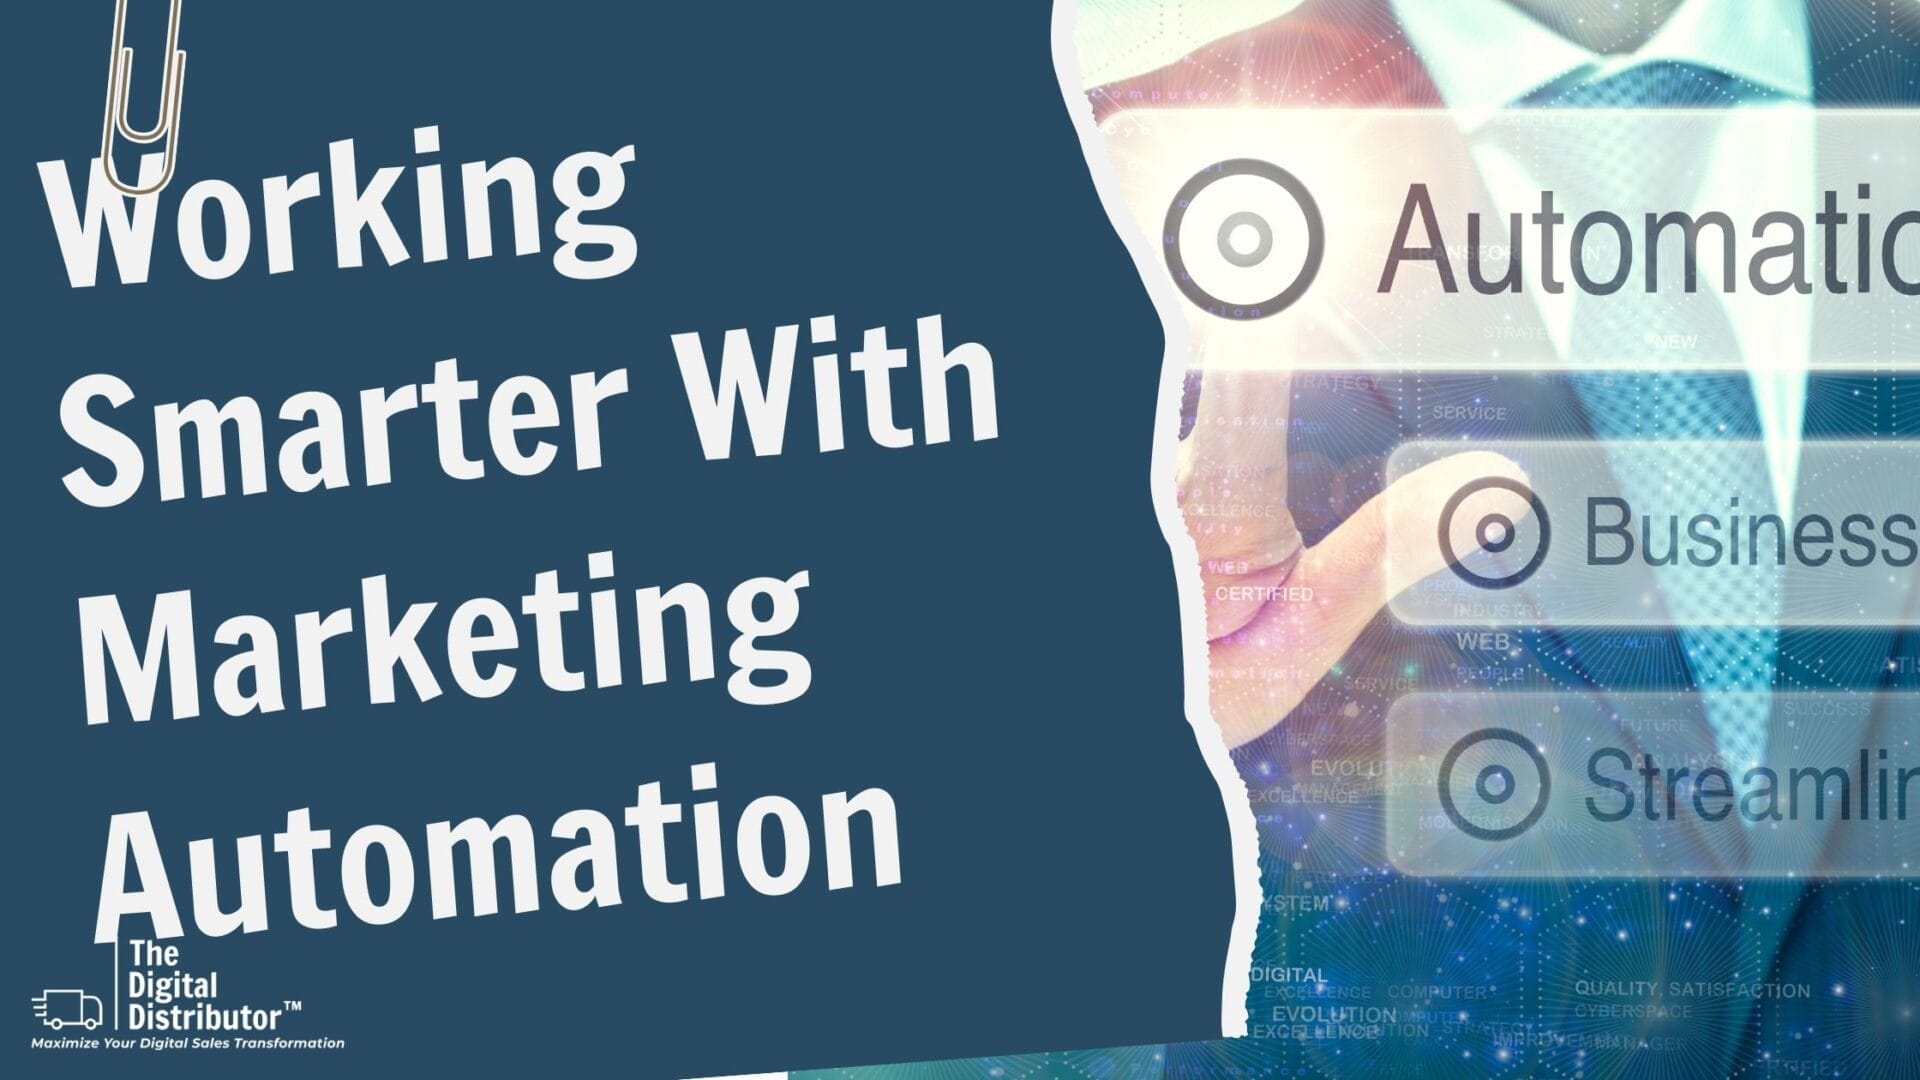 Working Smarter with Marketing Automation